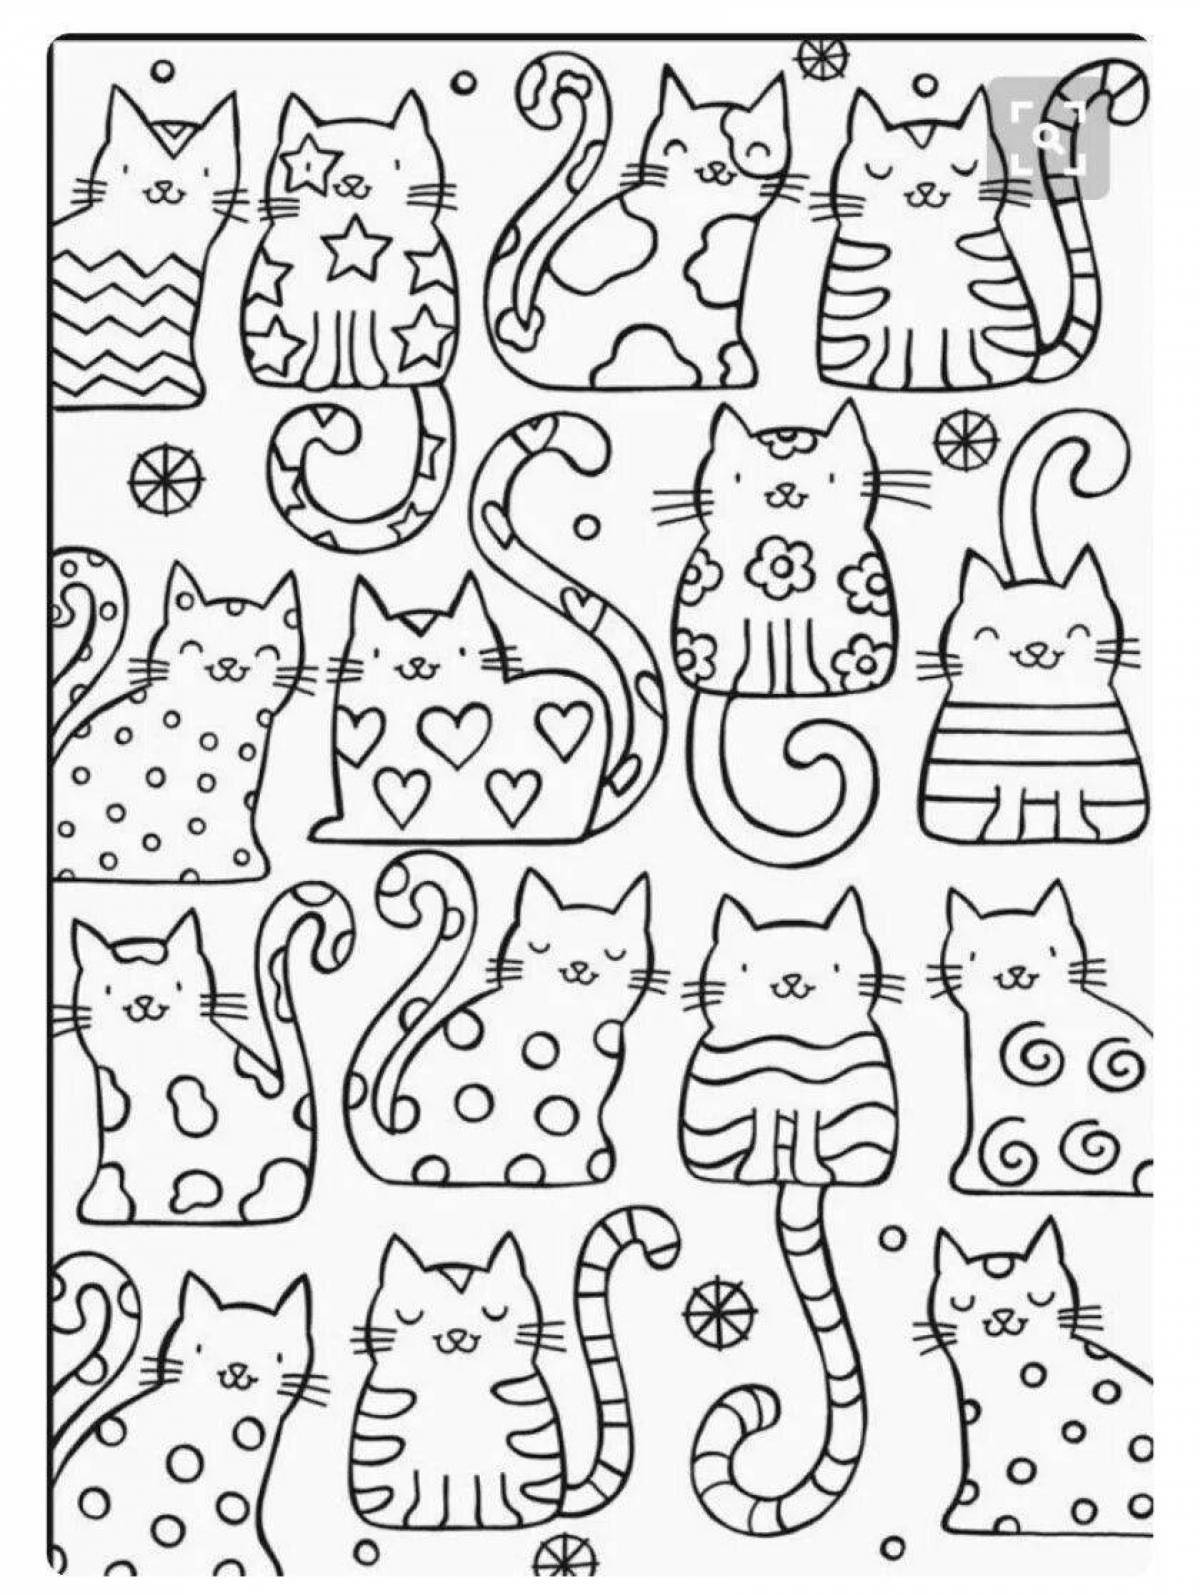 Exquisite coloring book for 12 year old girls with cute cats